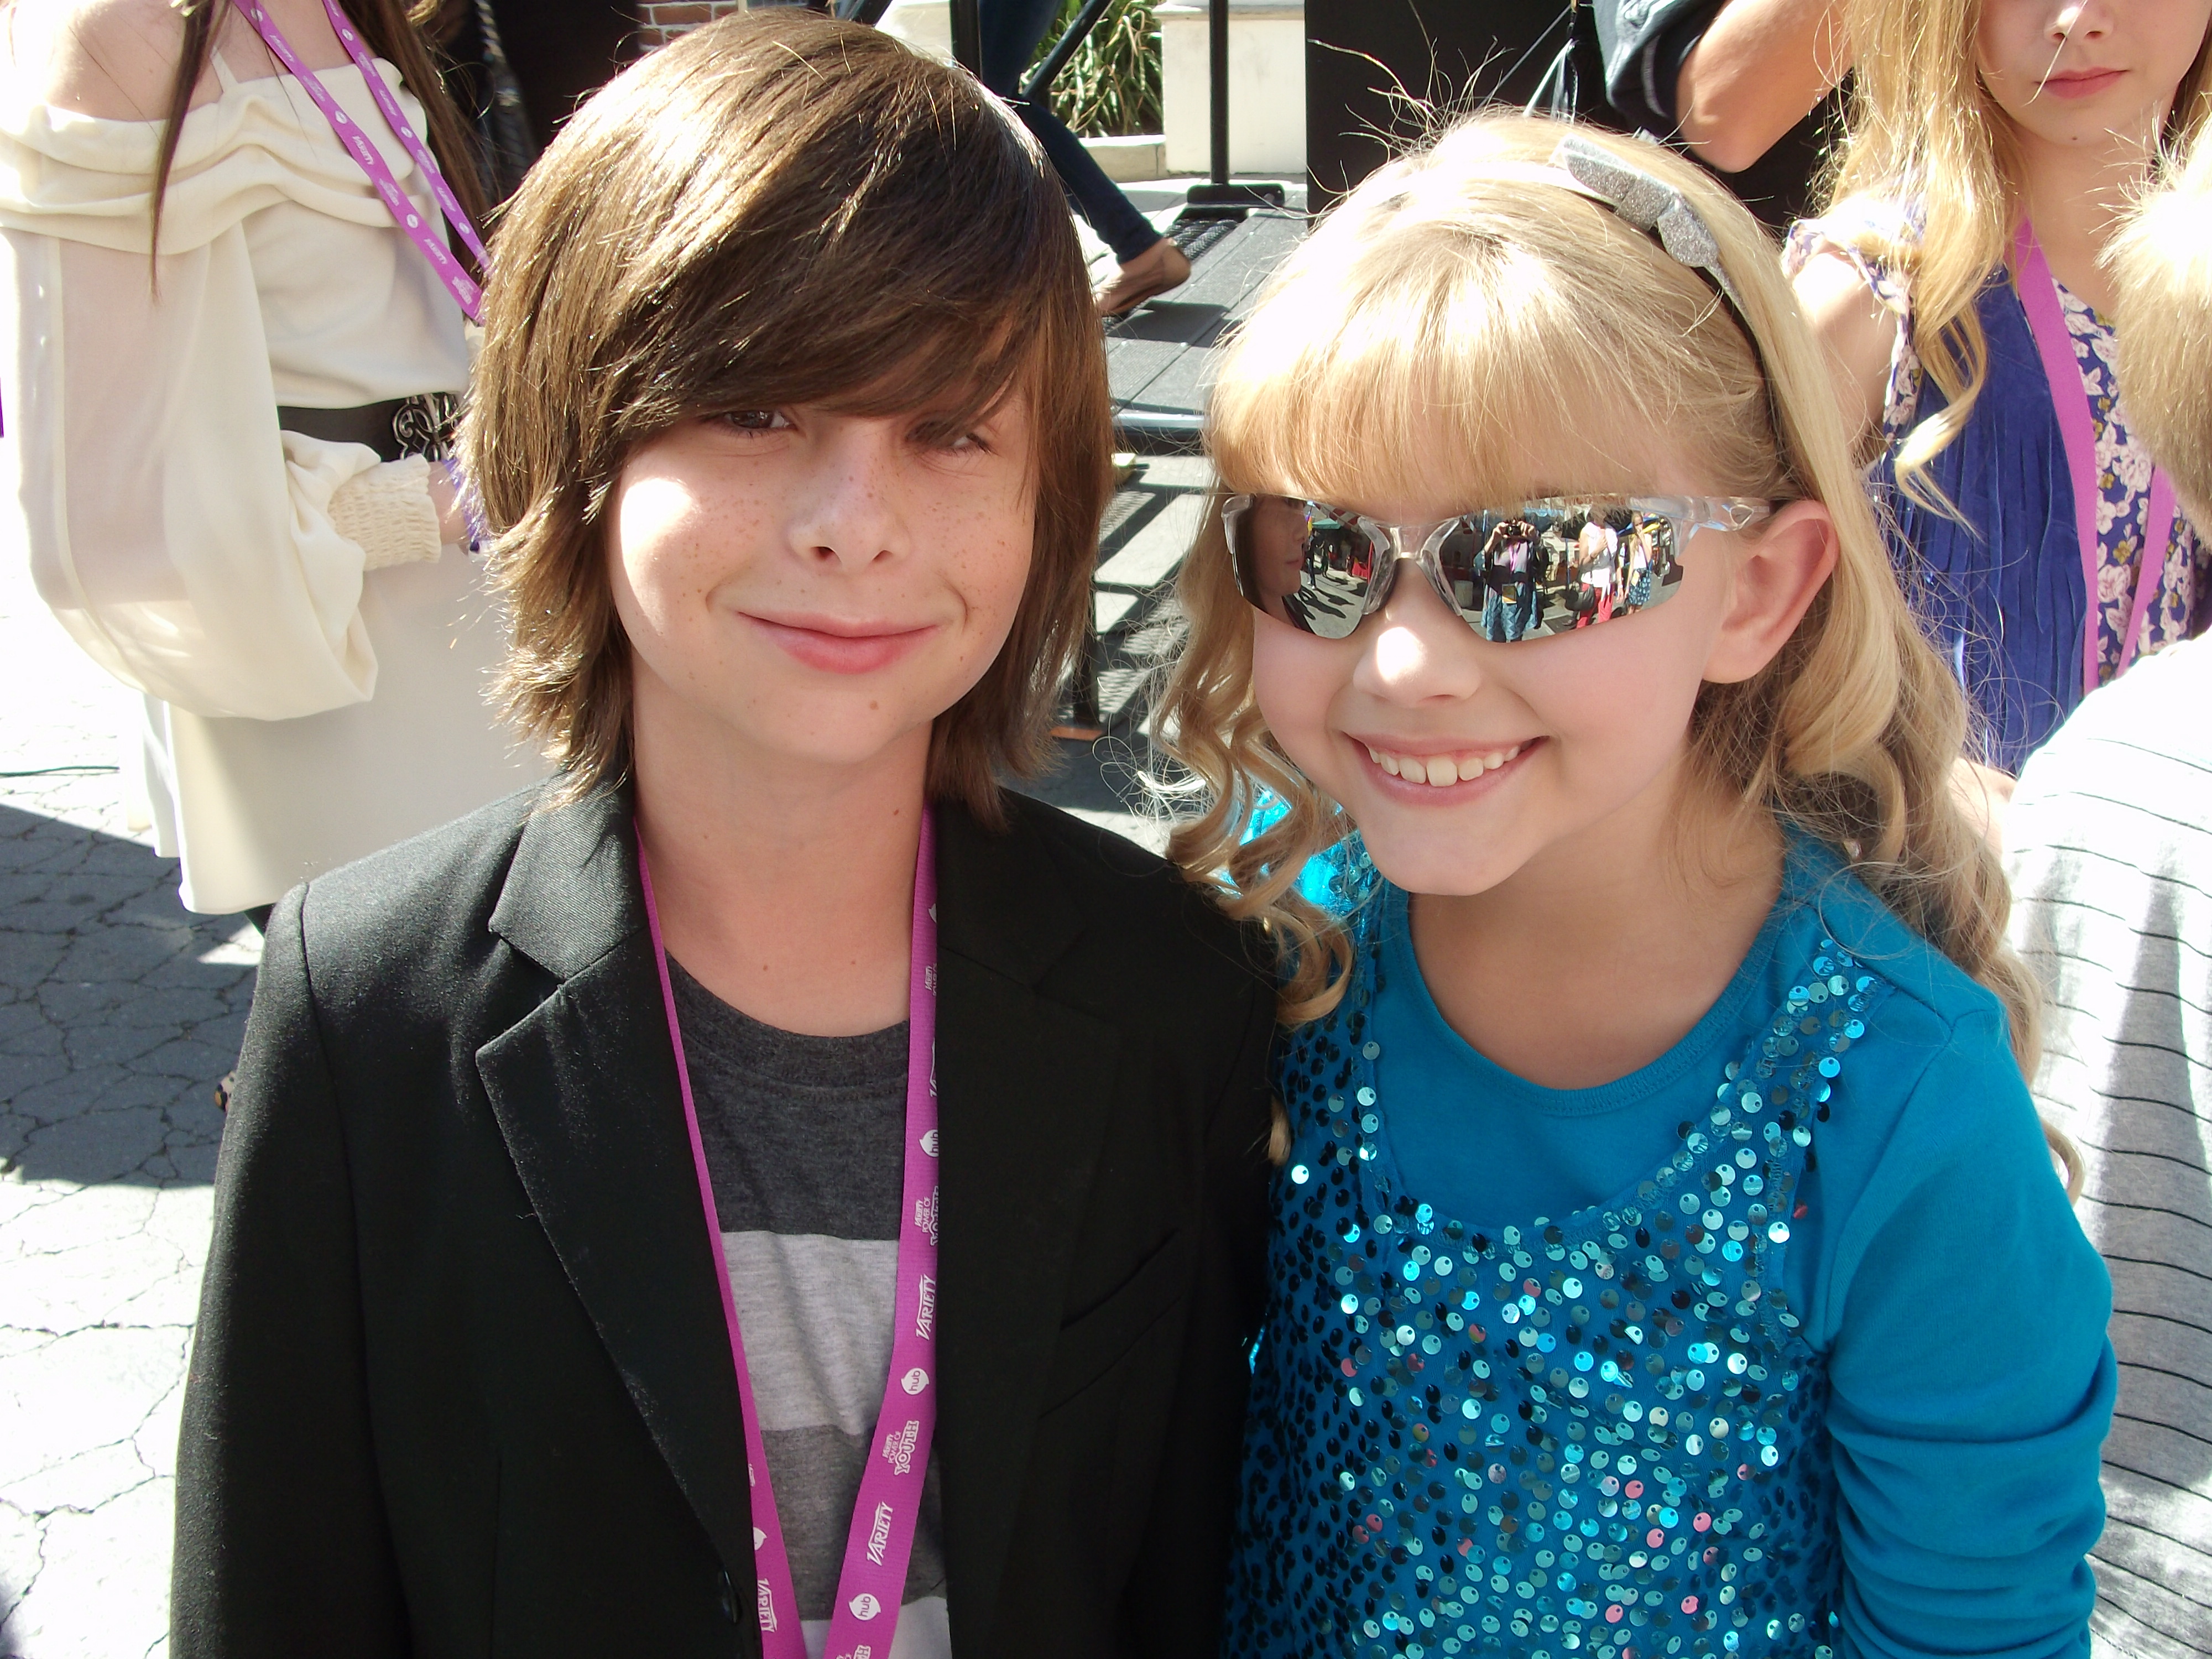 Robbie Tucker & Samantha Bailey (Both From CBS 'The Young & The Restless') attend The Power of Youth Event @ Paramount Studios 10/2011